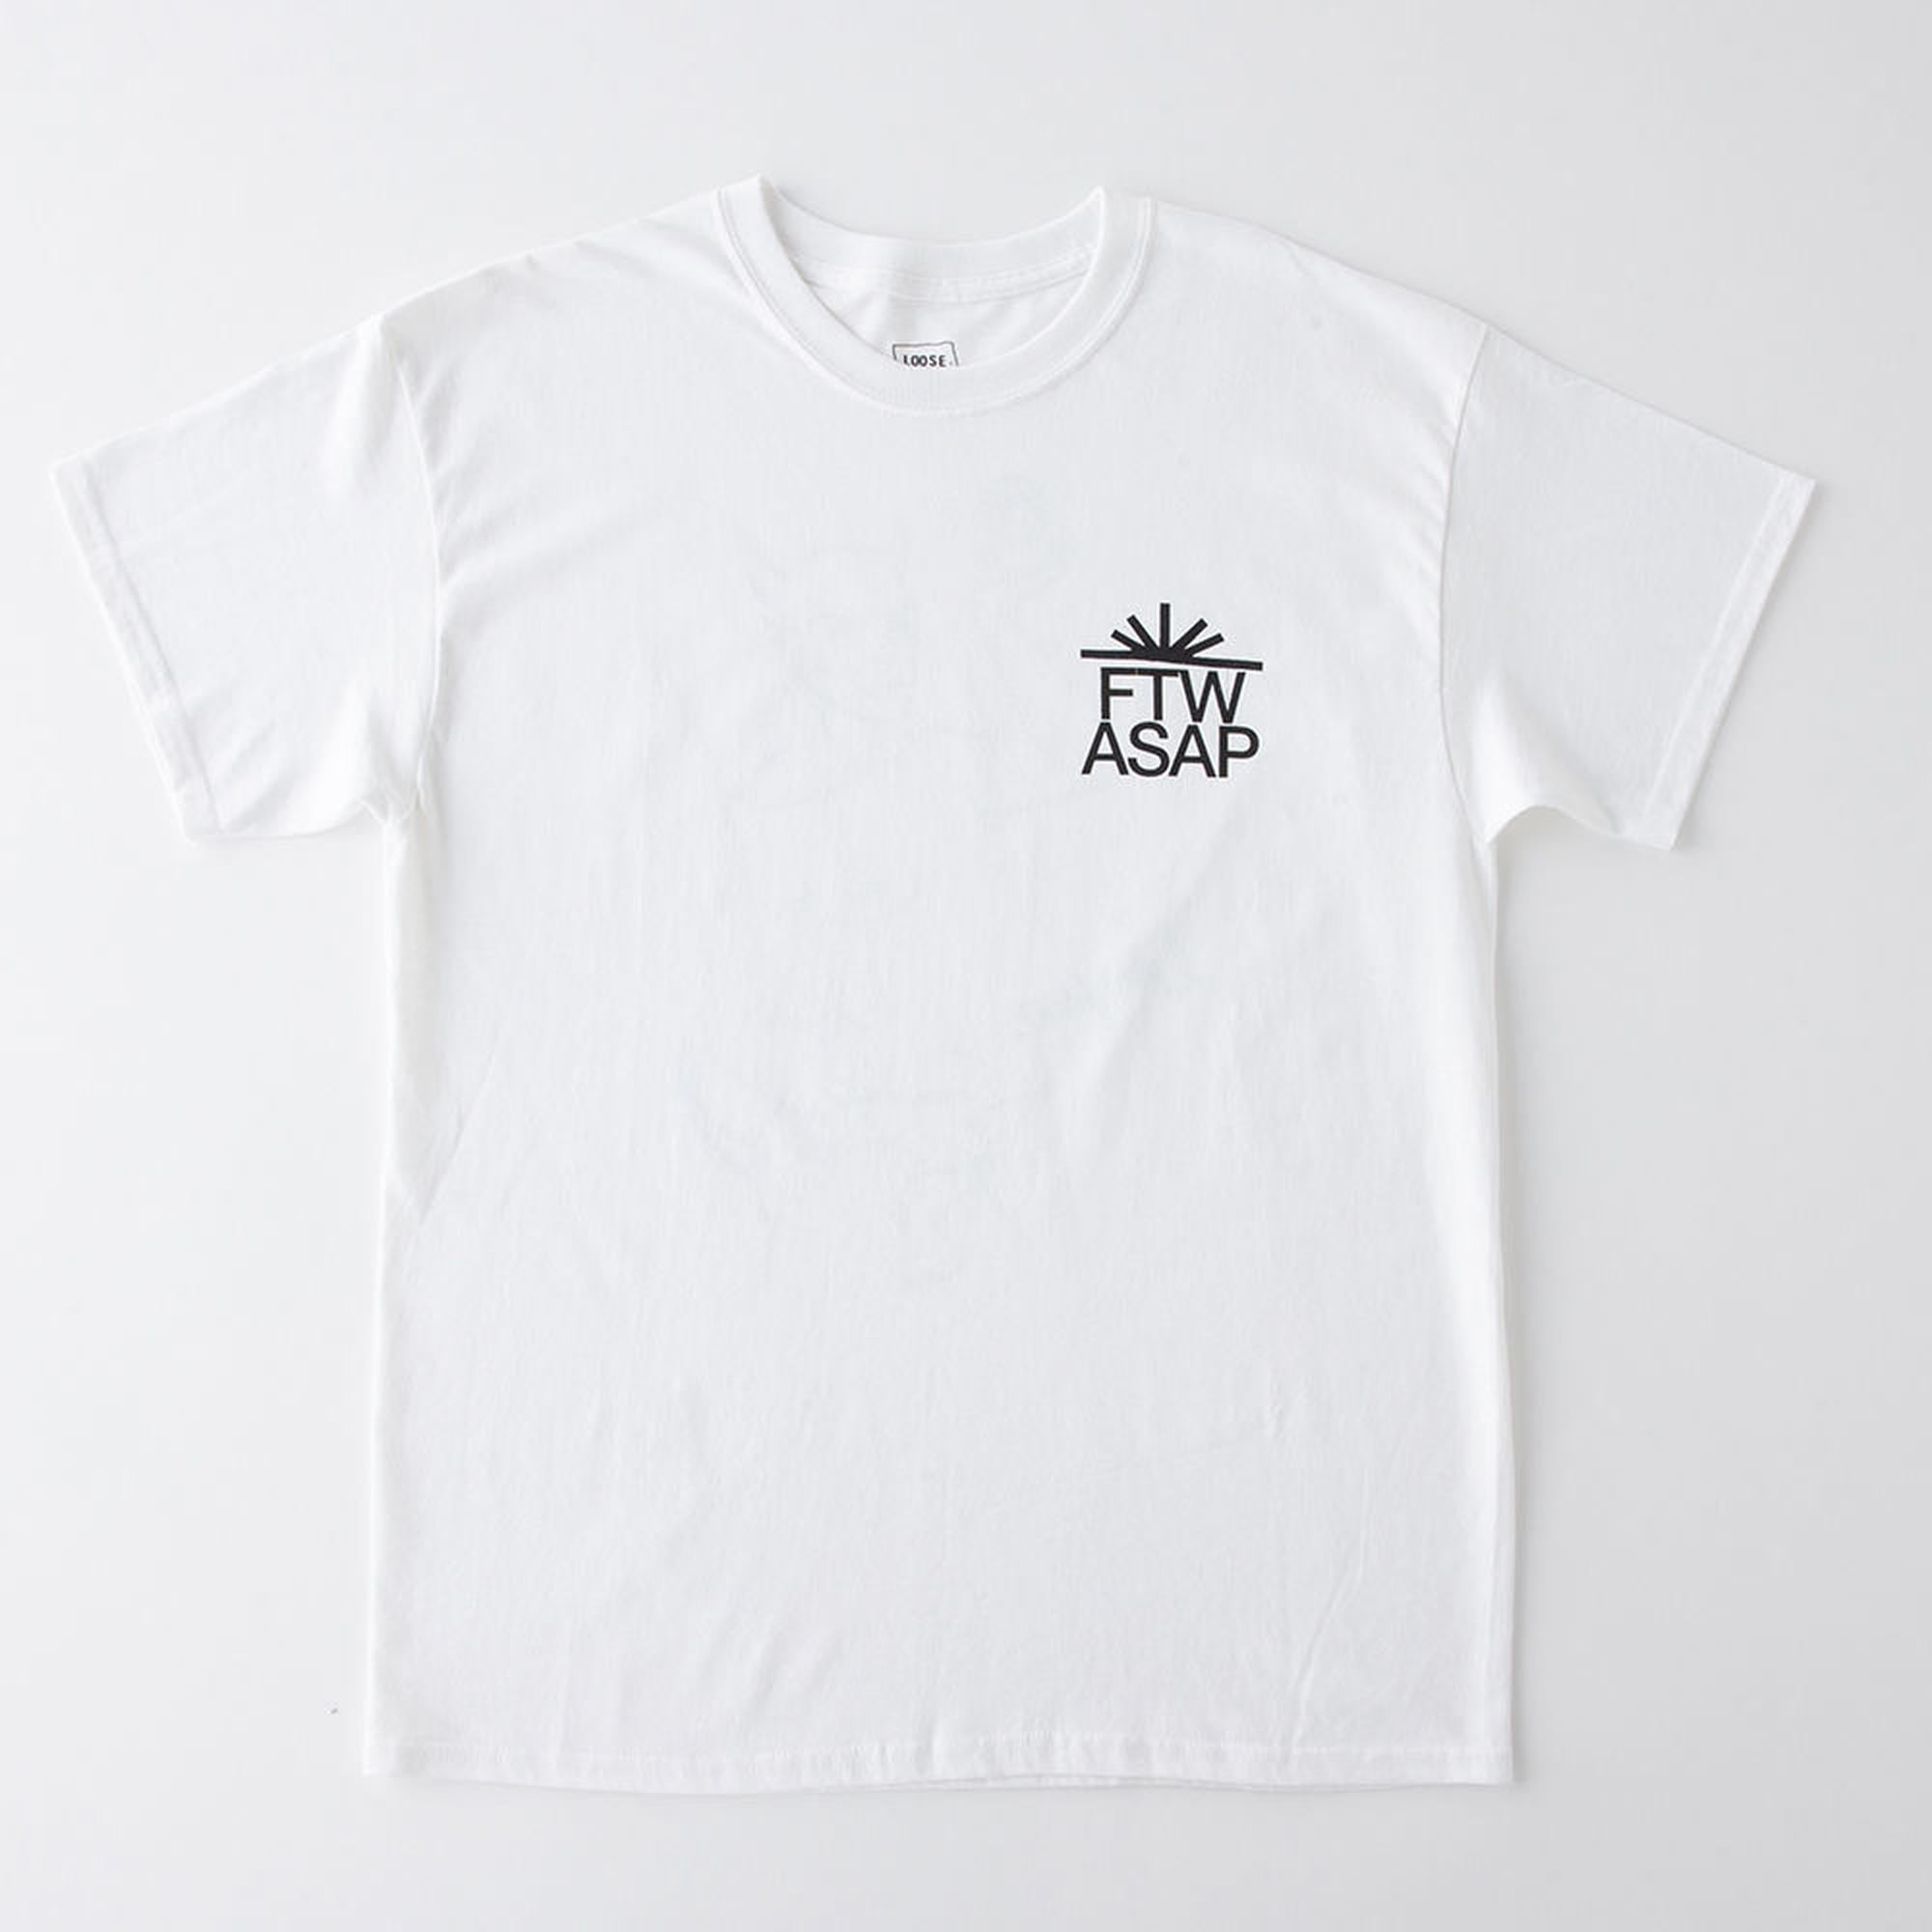 AD - 'Born to loose' S/S TEE